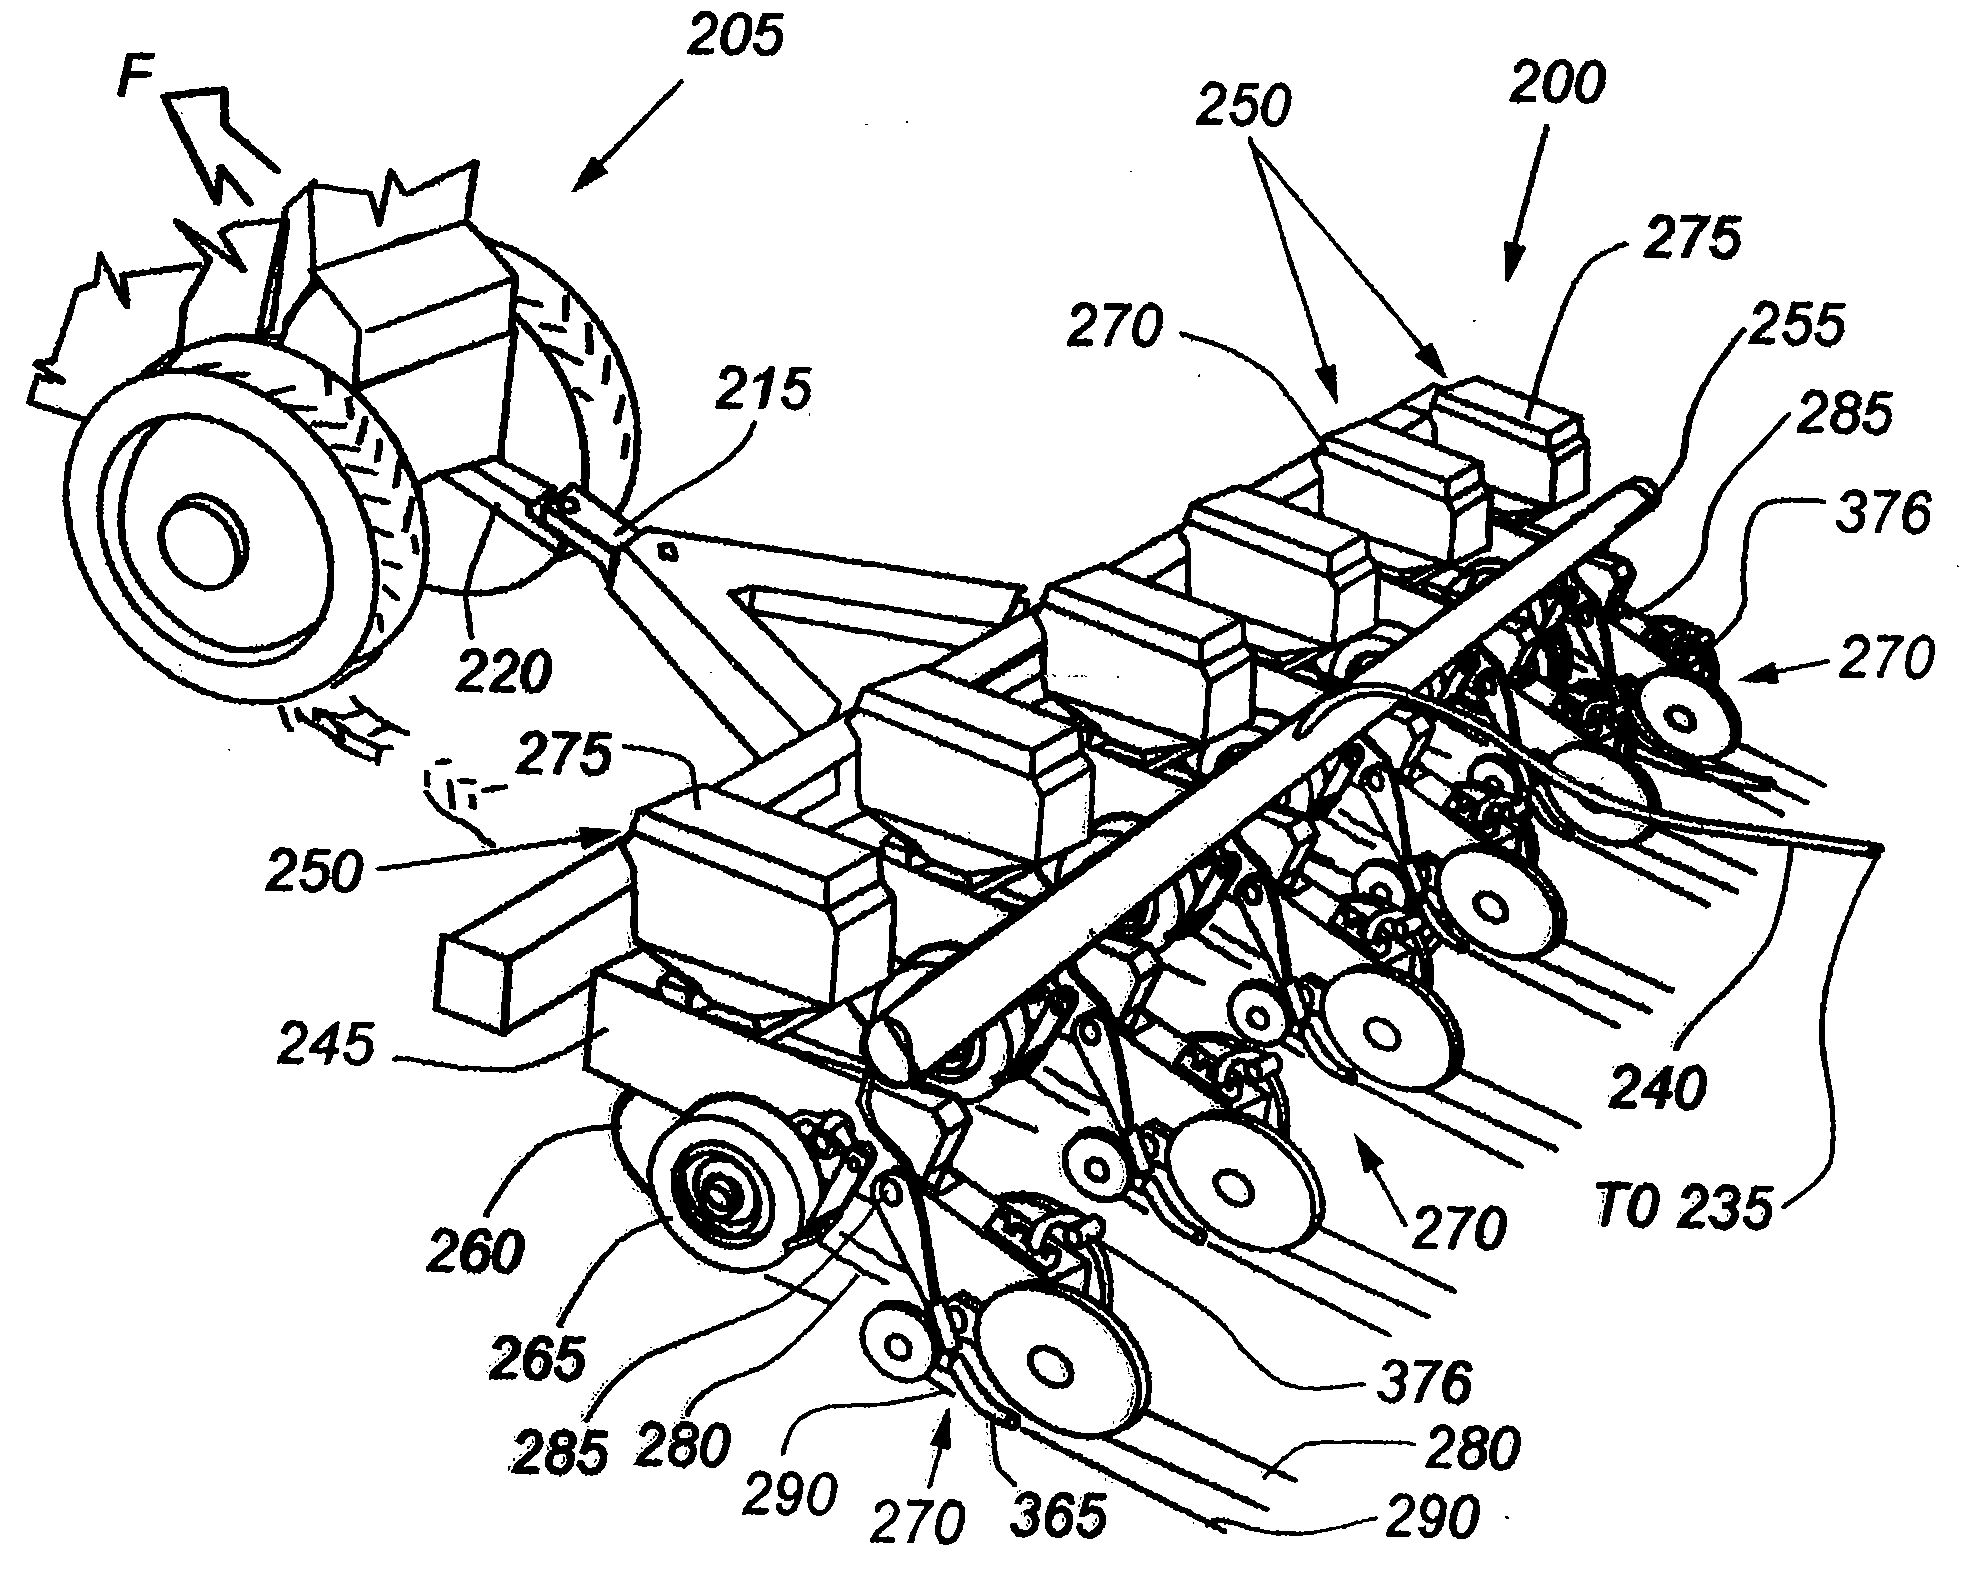 Seed planter with equalizer assembly